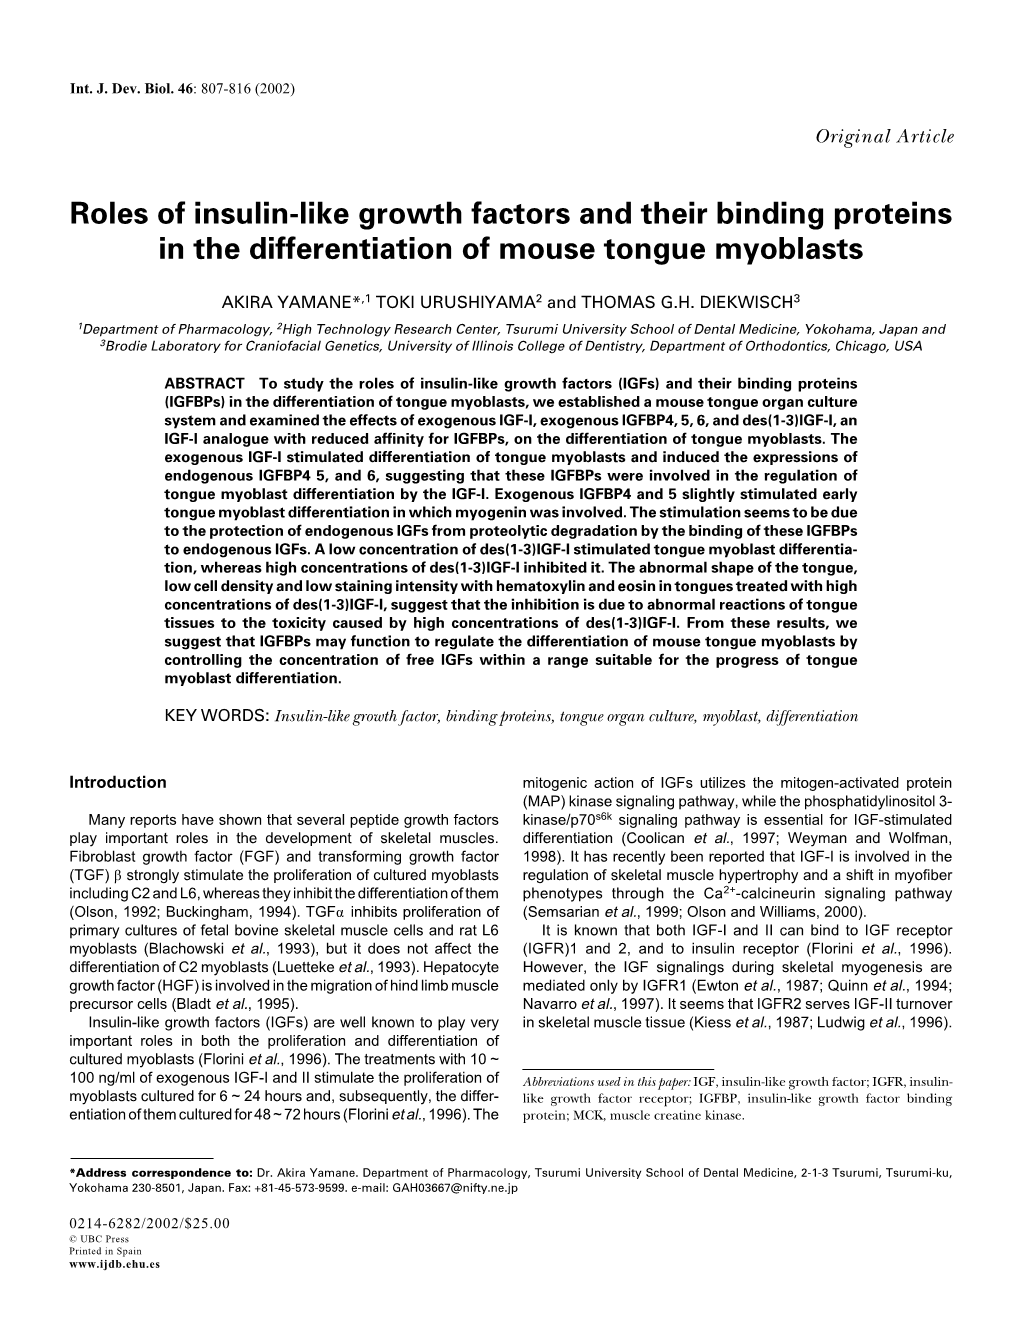 Roles of Insulin-Like Growth Factors and Their Binding Proteins in the Differentiation of Mouse Tongue Myoblasts